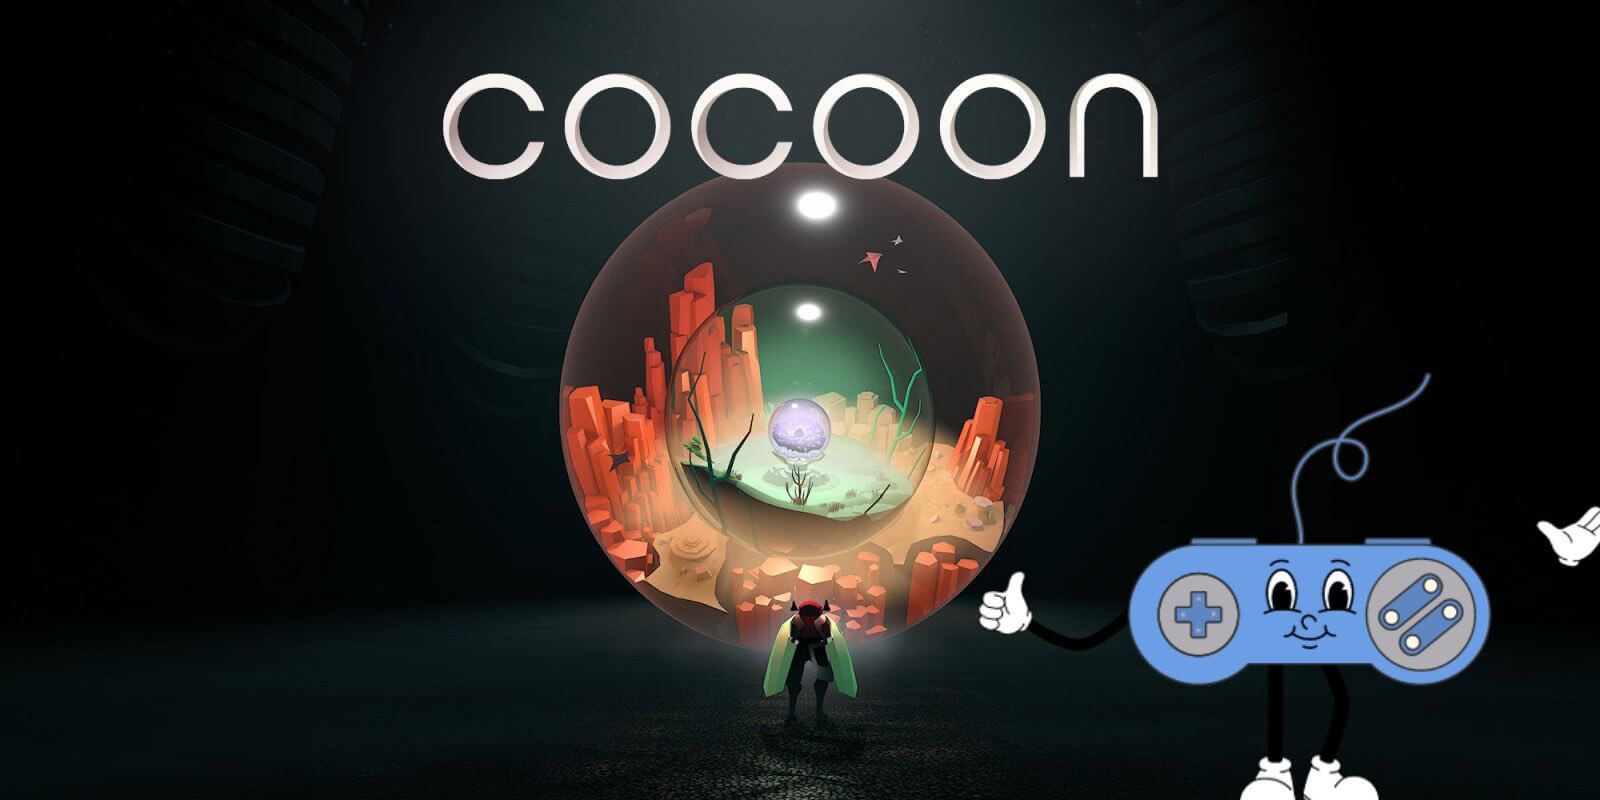 The cover art for the game cocoon showing a small character looking at a ball showing an environment inside of it. Paddy the thumb culture mascot, a blue controller with a happy face is giving the game a thumbs up.